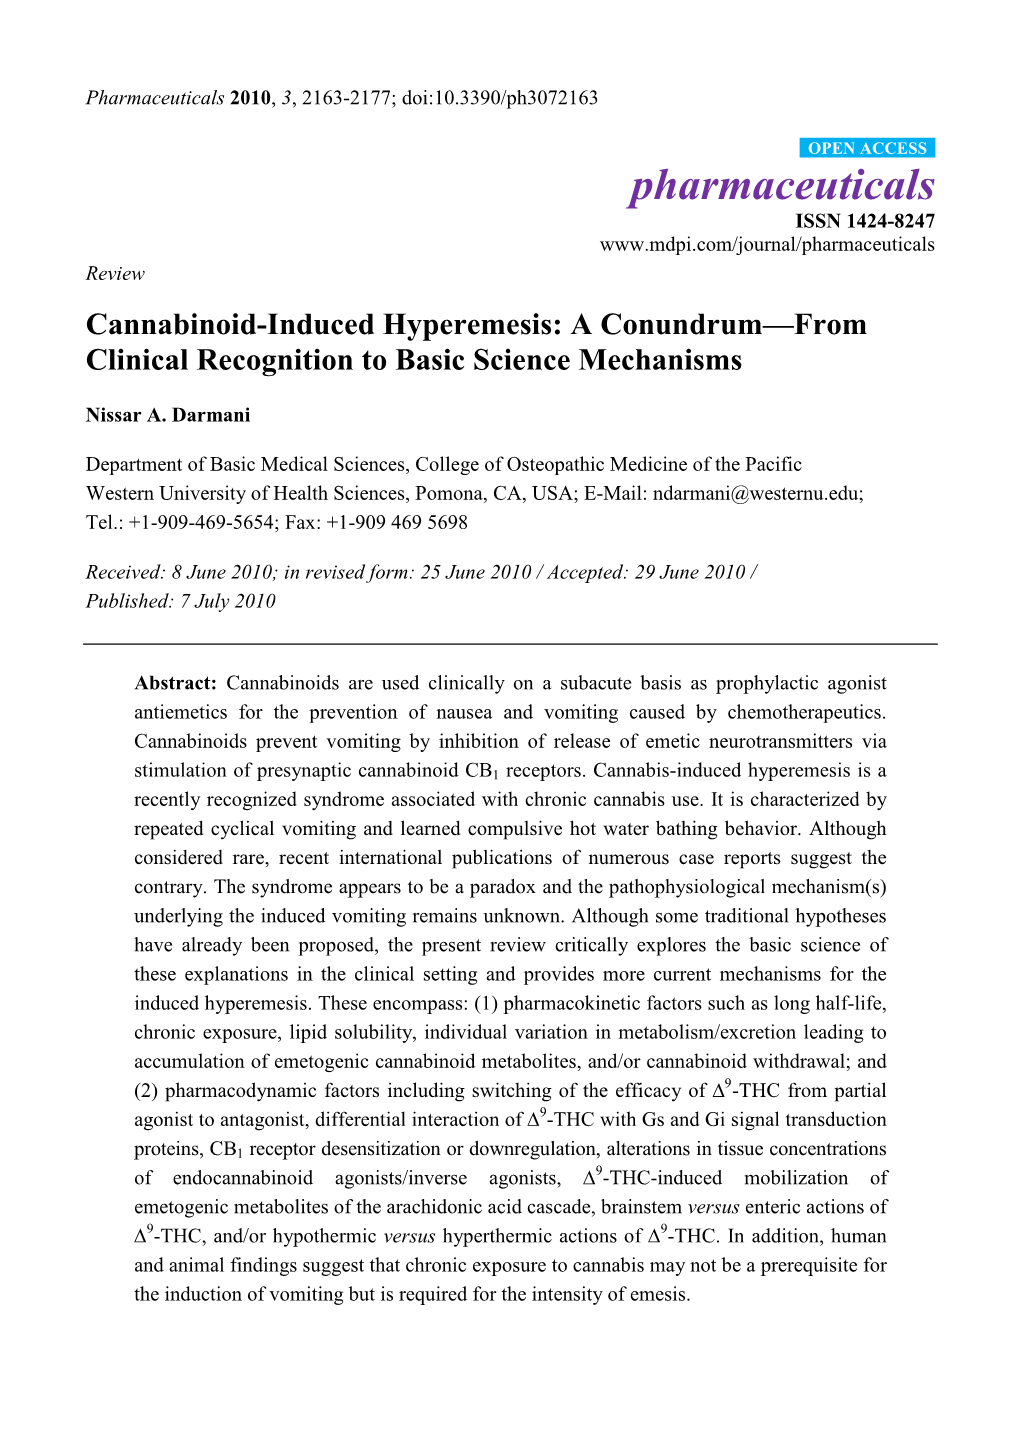 Cannabinoid-Induced Hyperemesis: a Conundrum—From Clinical Recognition to Basic Science Mechanisms